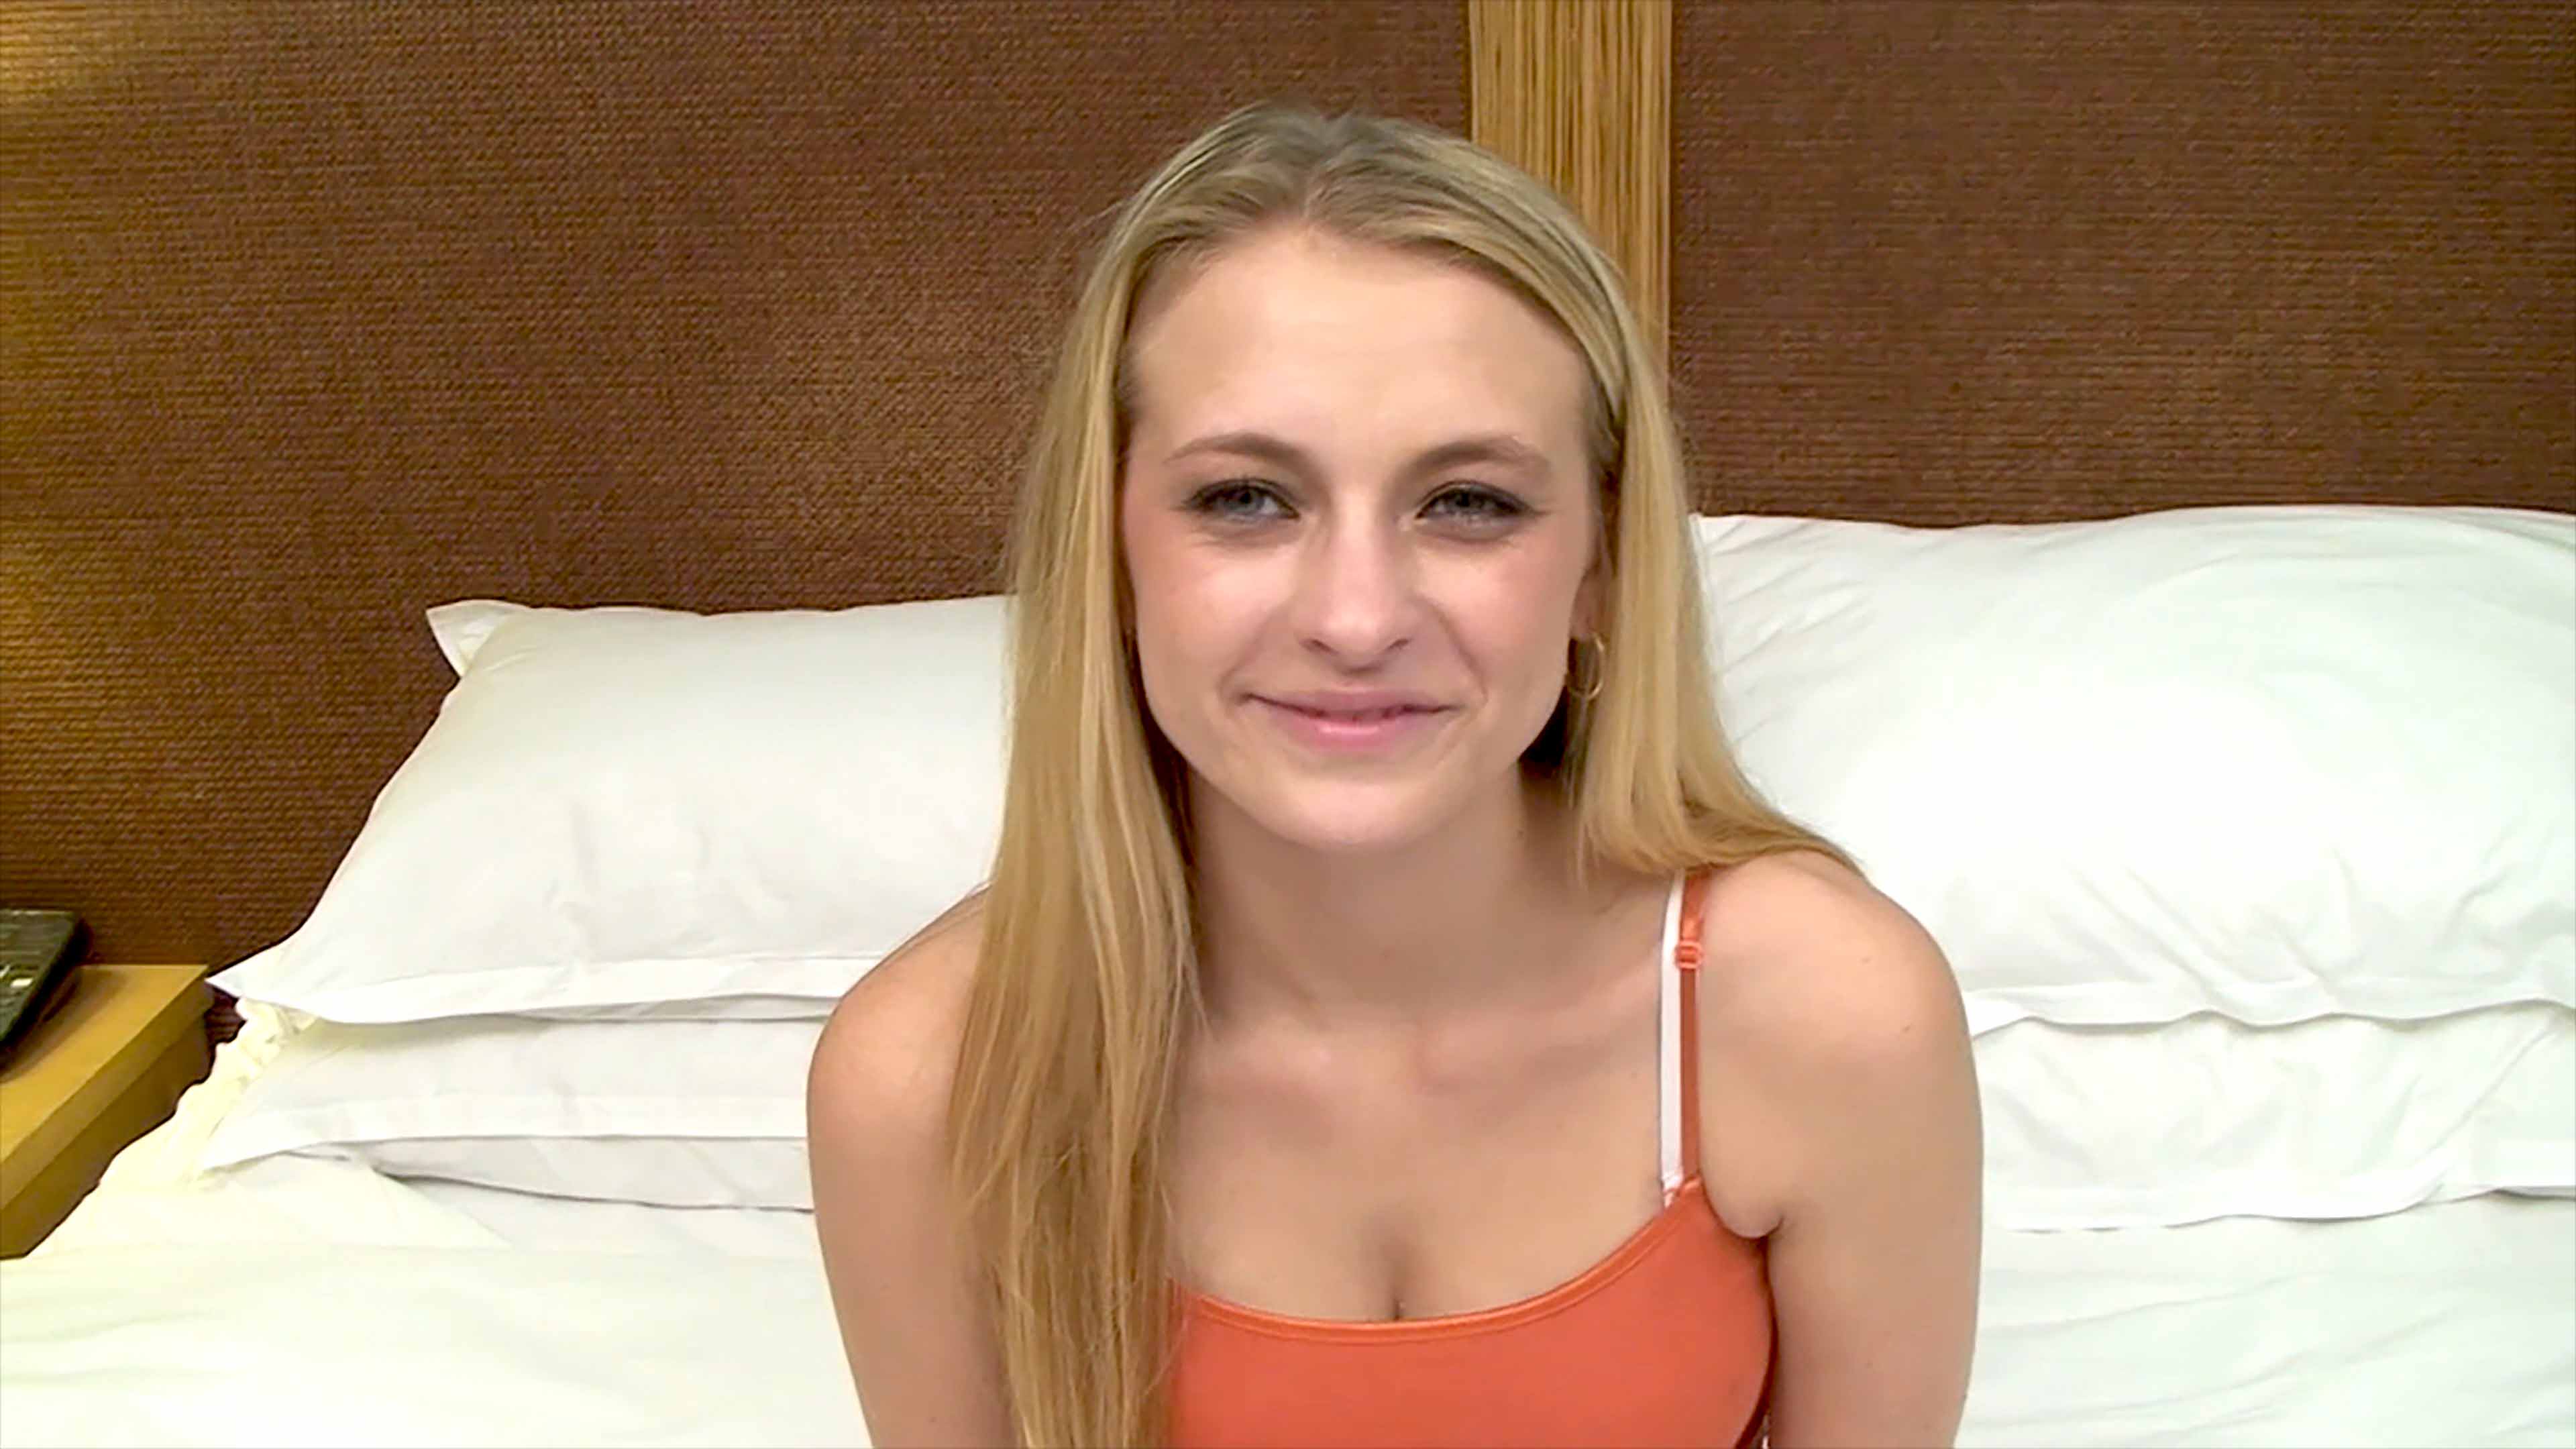 3840px x 2160px - Its.PORN - She is 18 and very nervous starring in her first xxx video